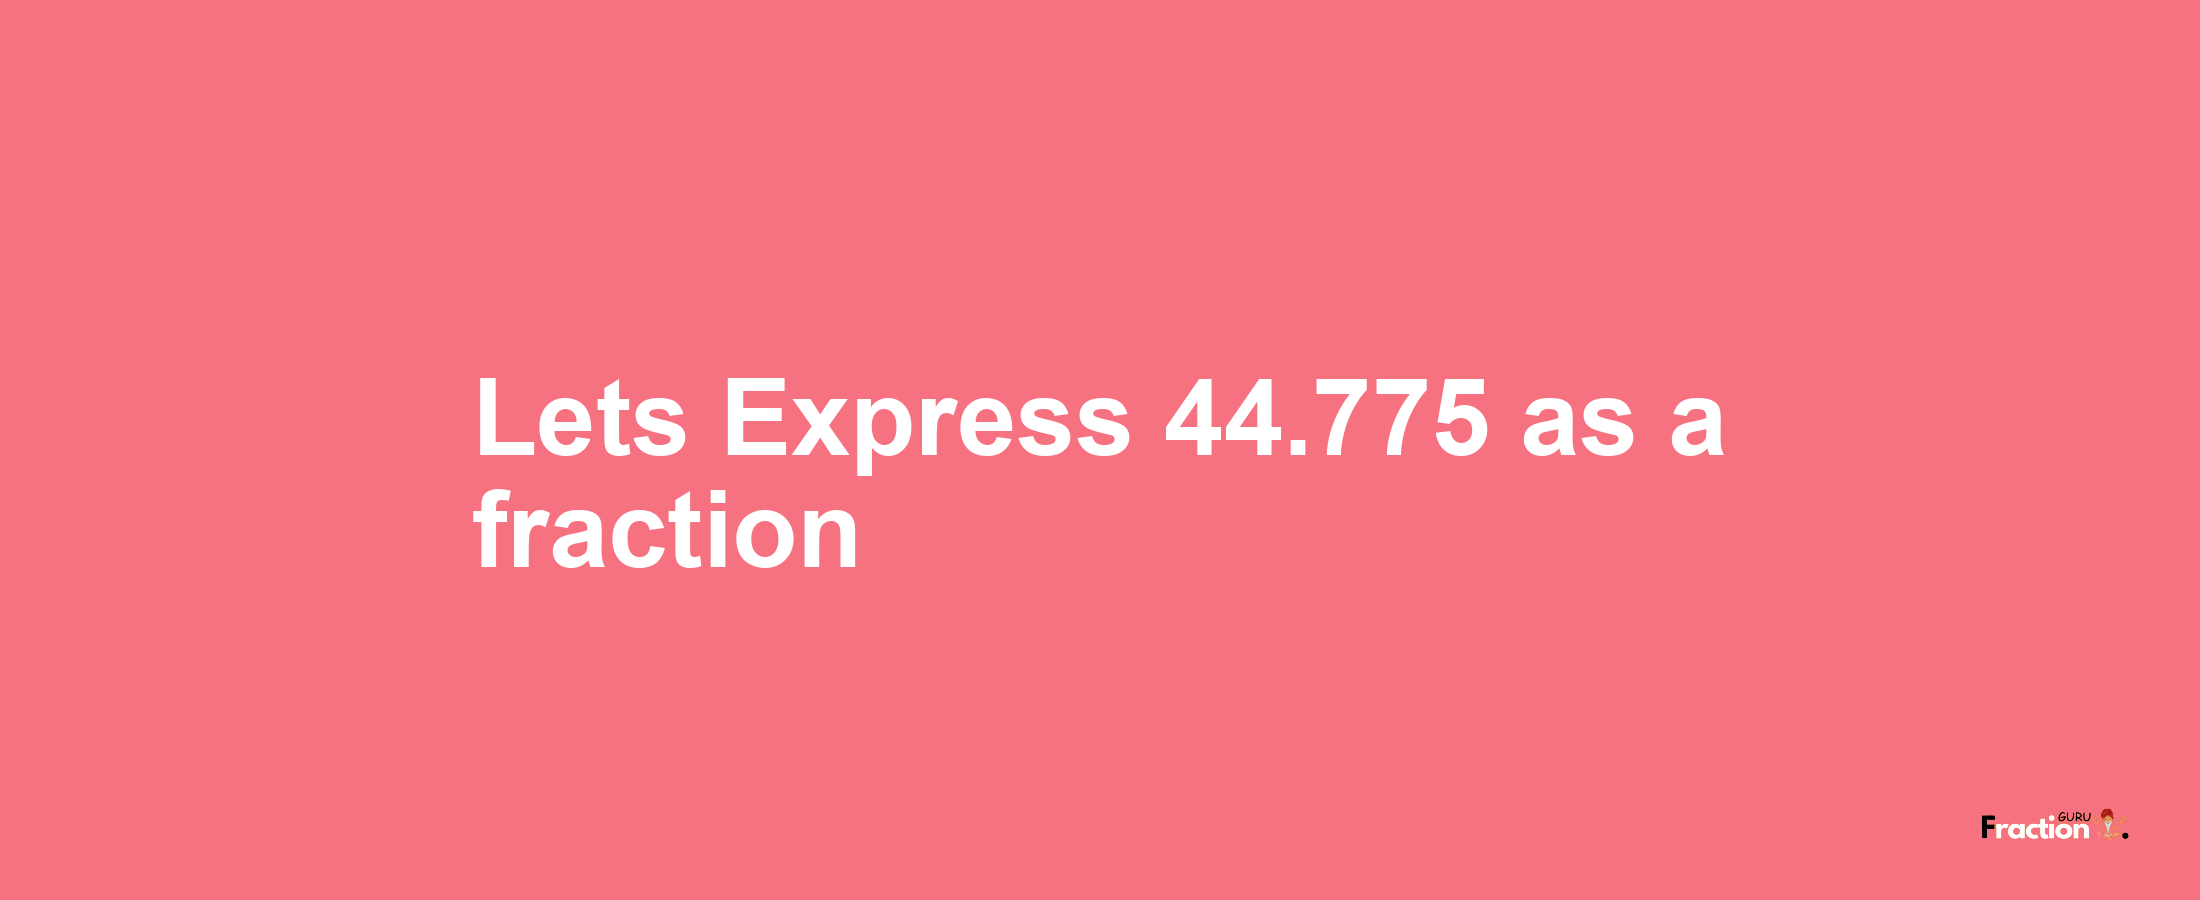 Lets Express 44.775 as afraction